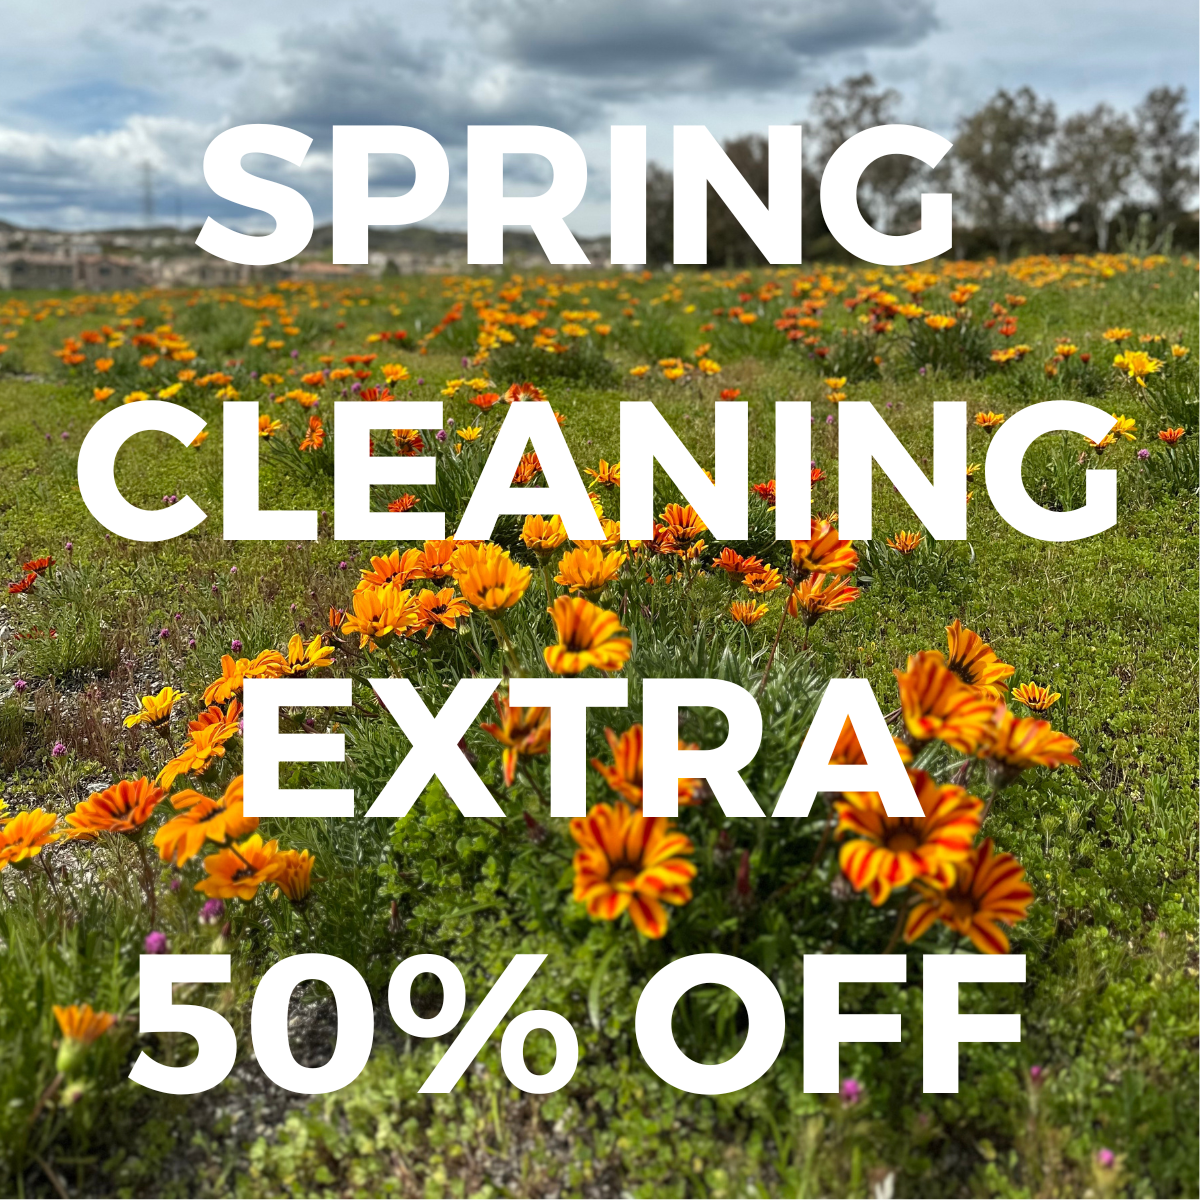 A field of flowers covered by the text "SPRING CLEANING EXTRA 50% OFF"